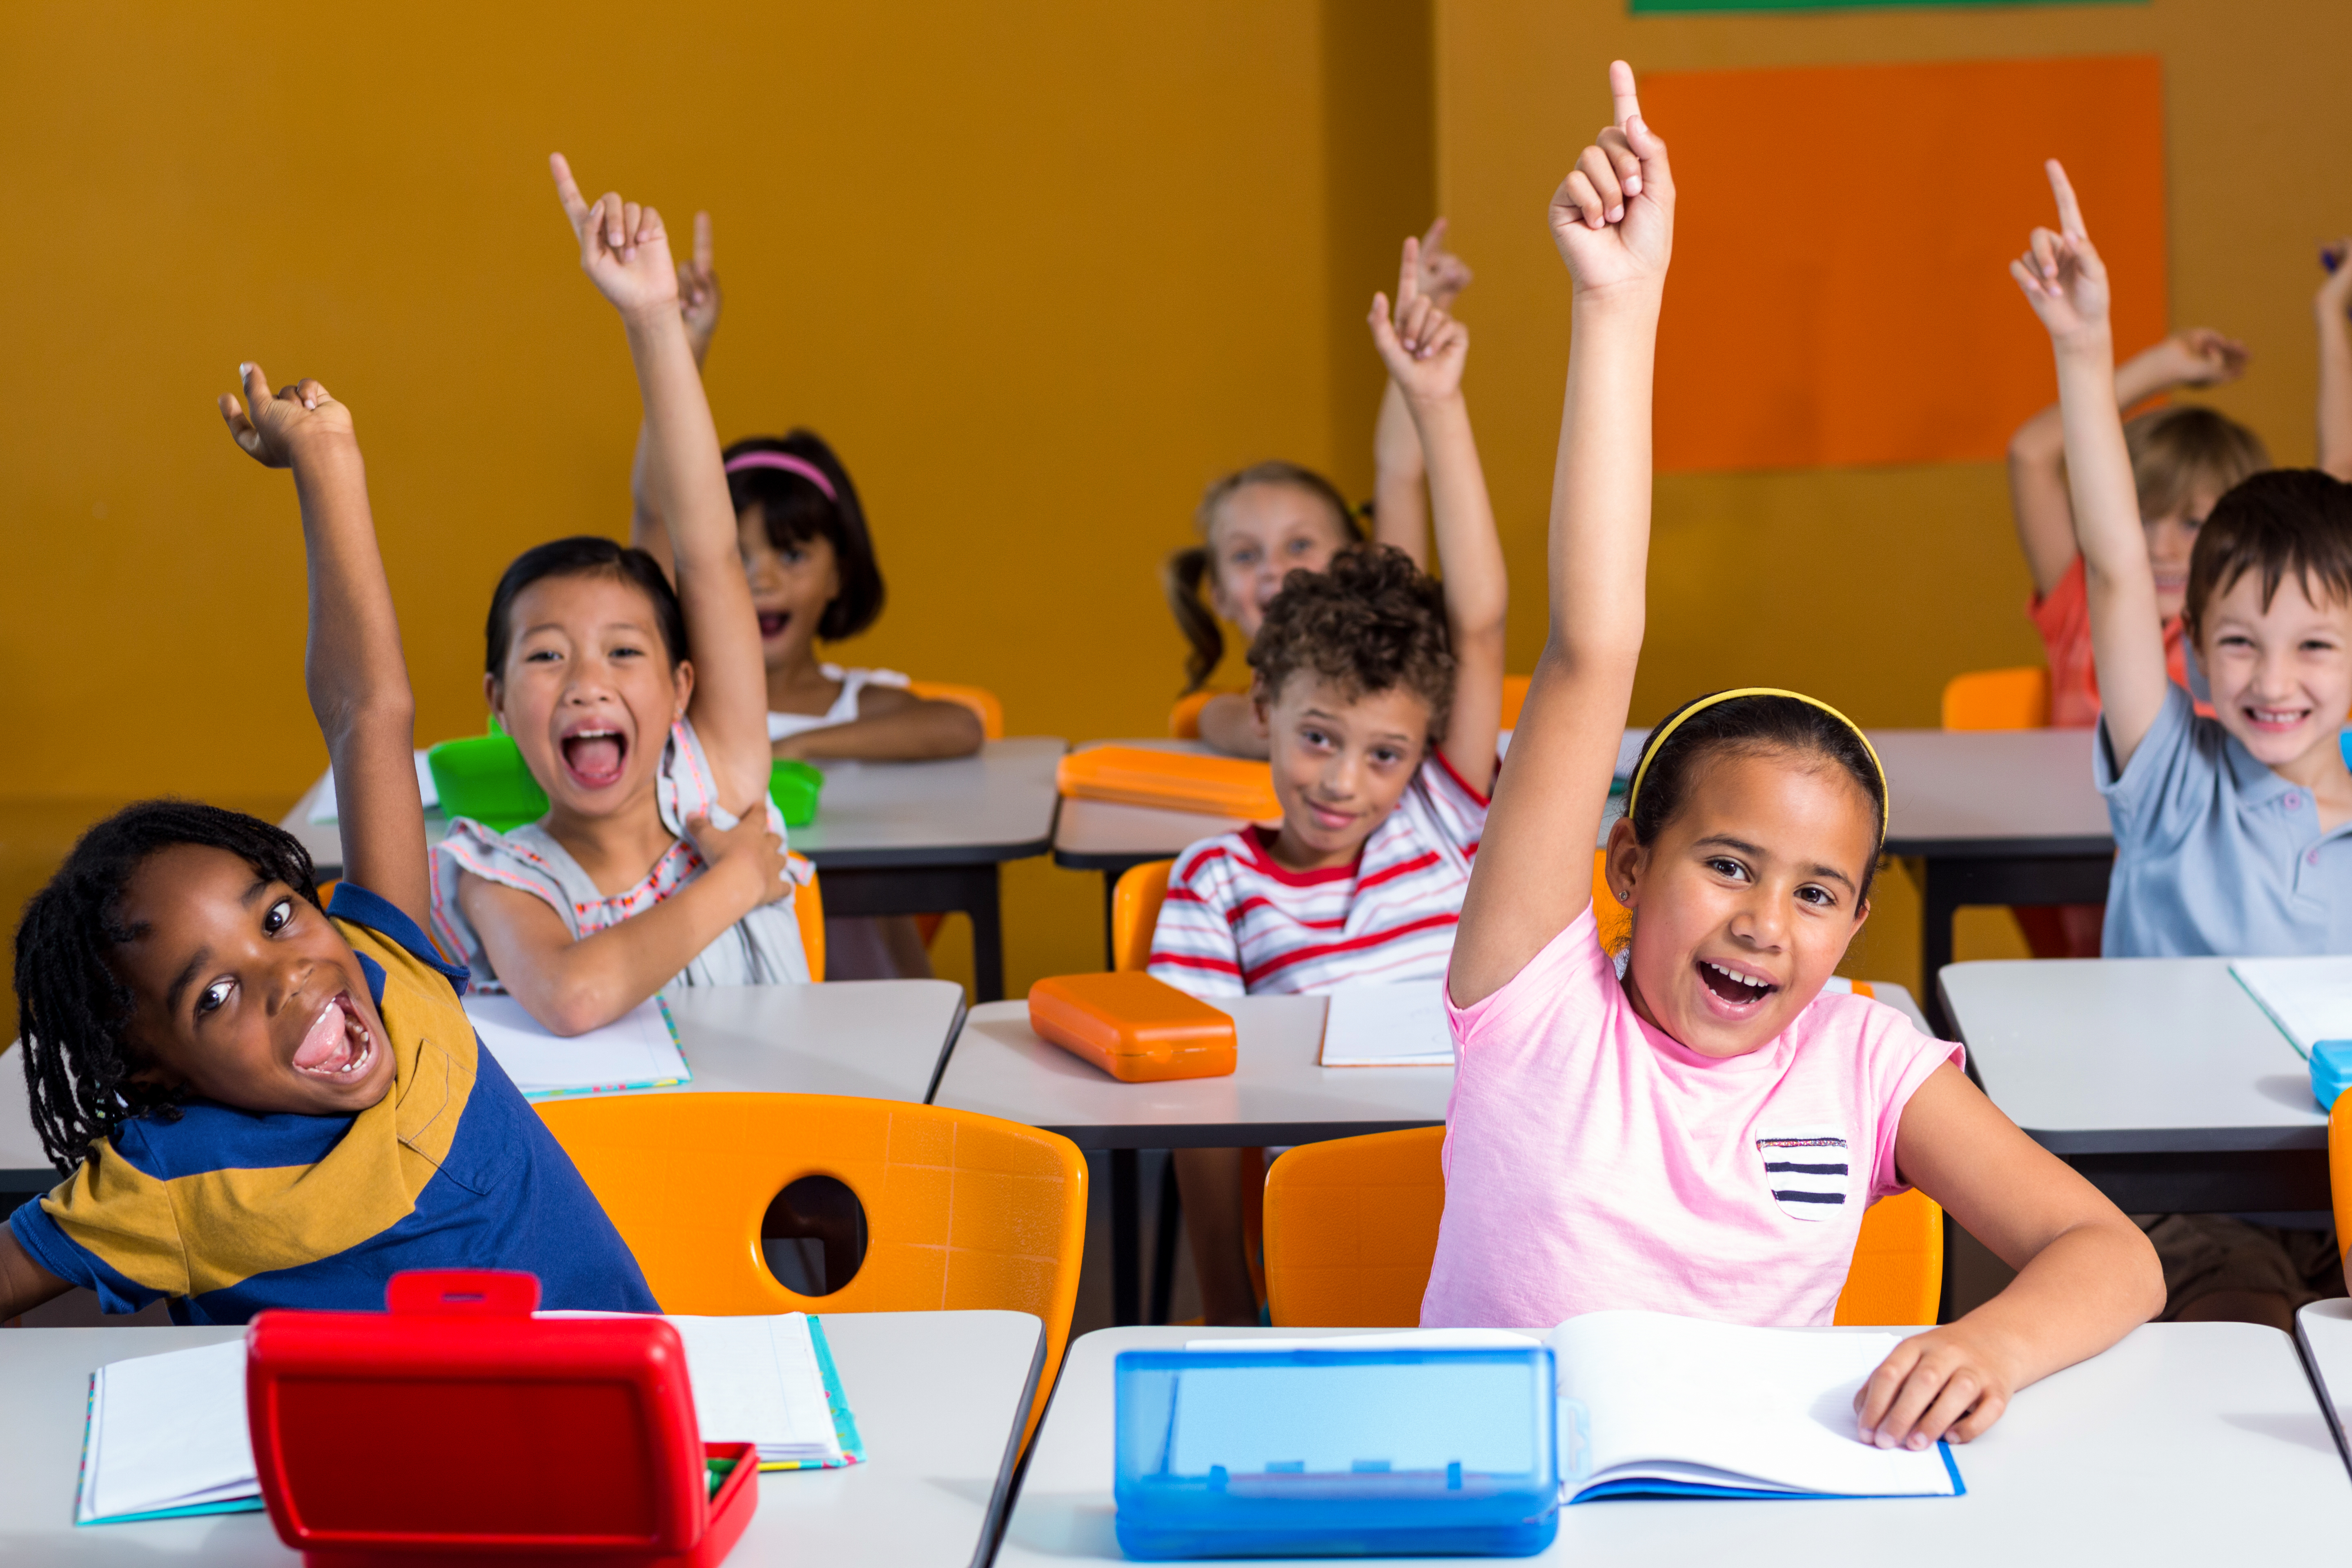 Smiling children in a classroom raising their hands